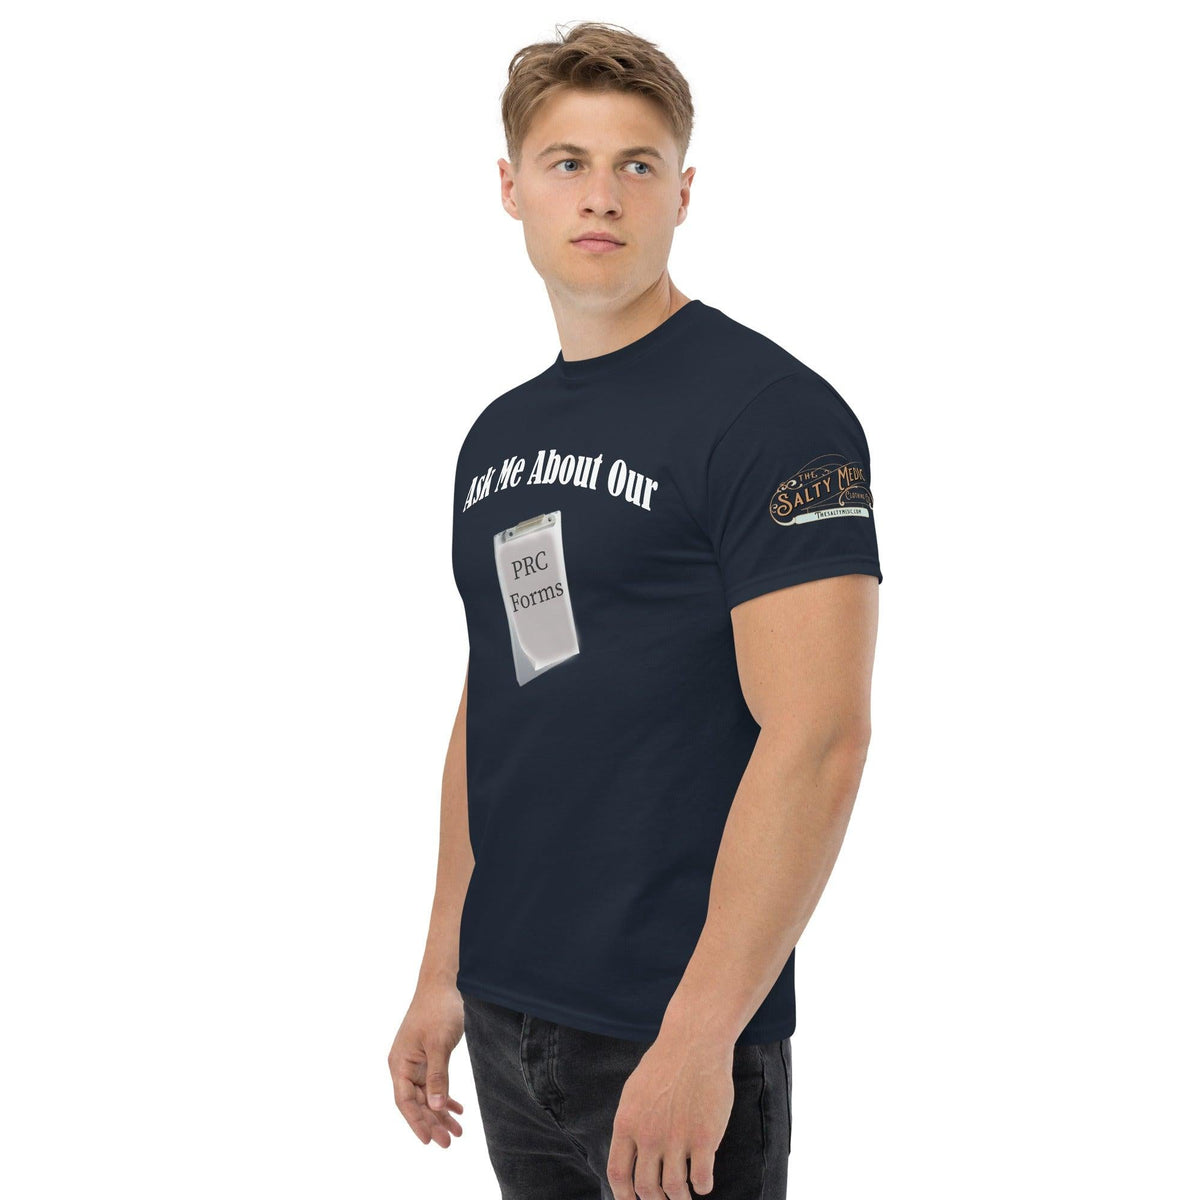 Ask me about our PRC forms Men's classic tee - Salty Medic Clothing Co.